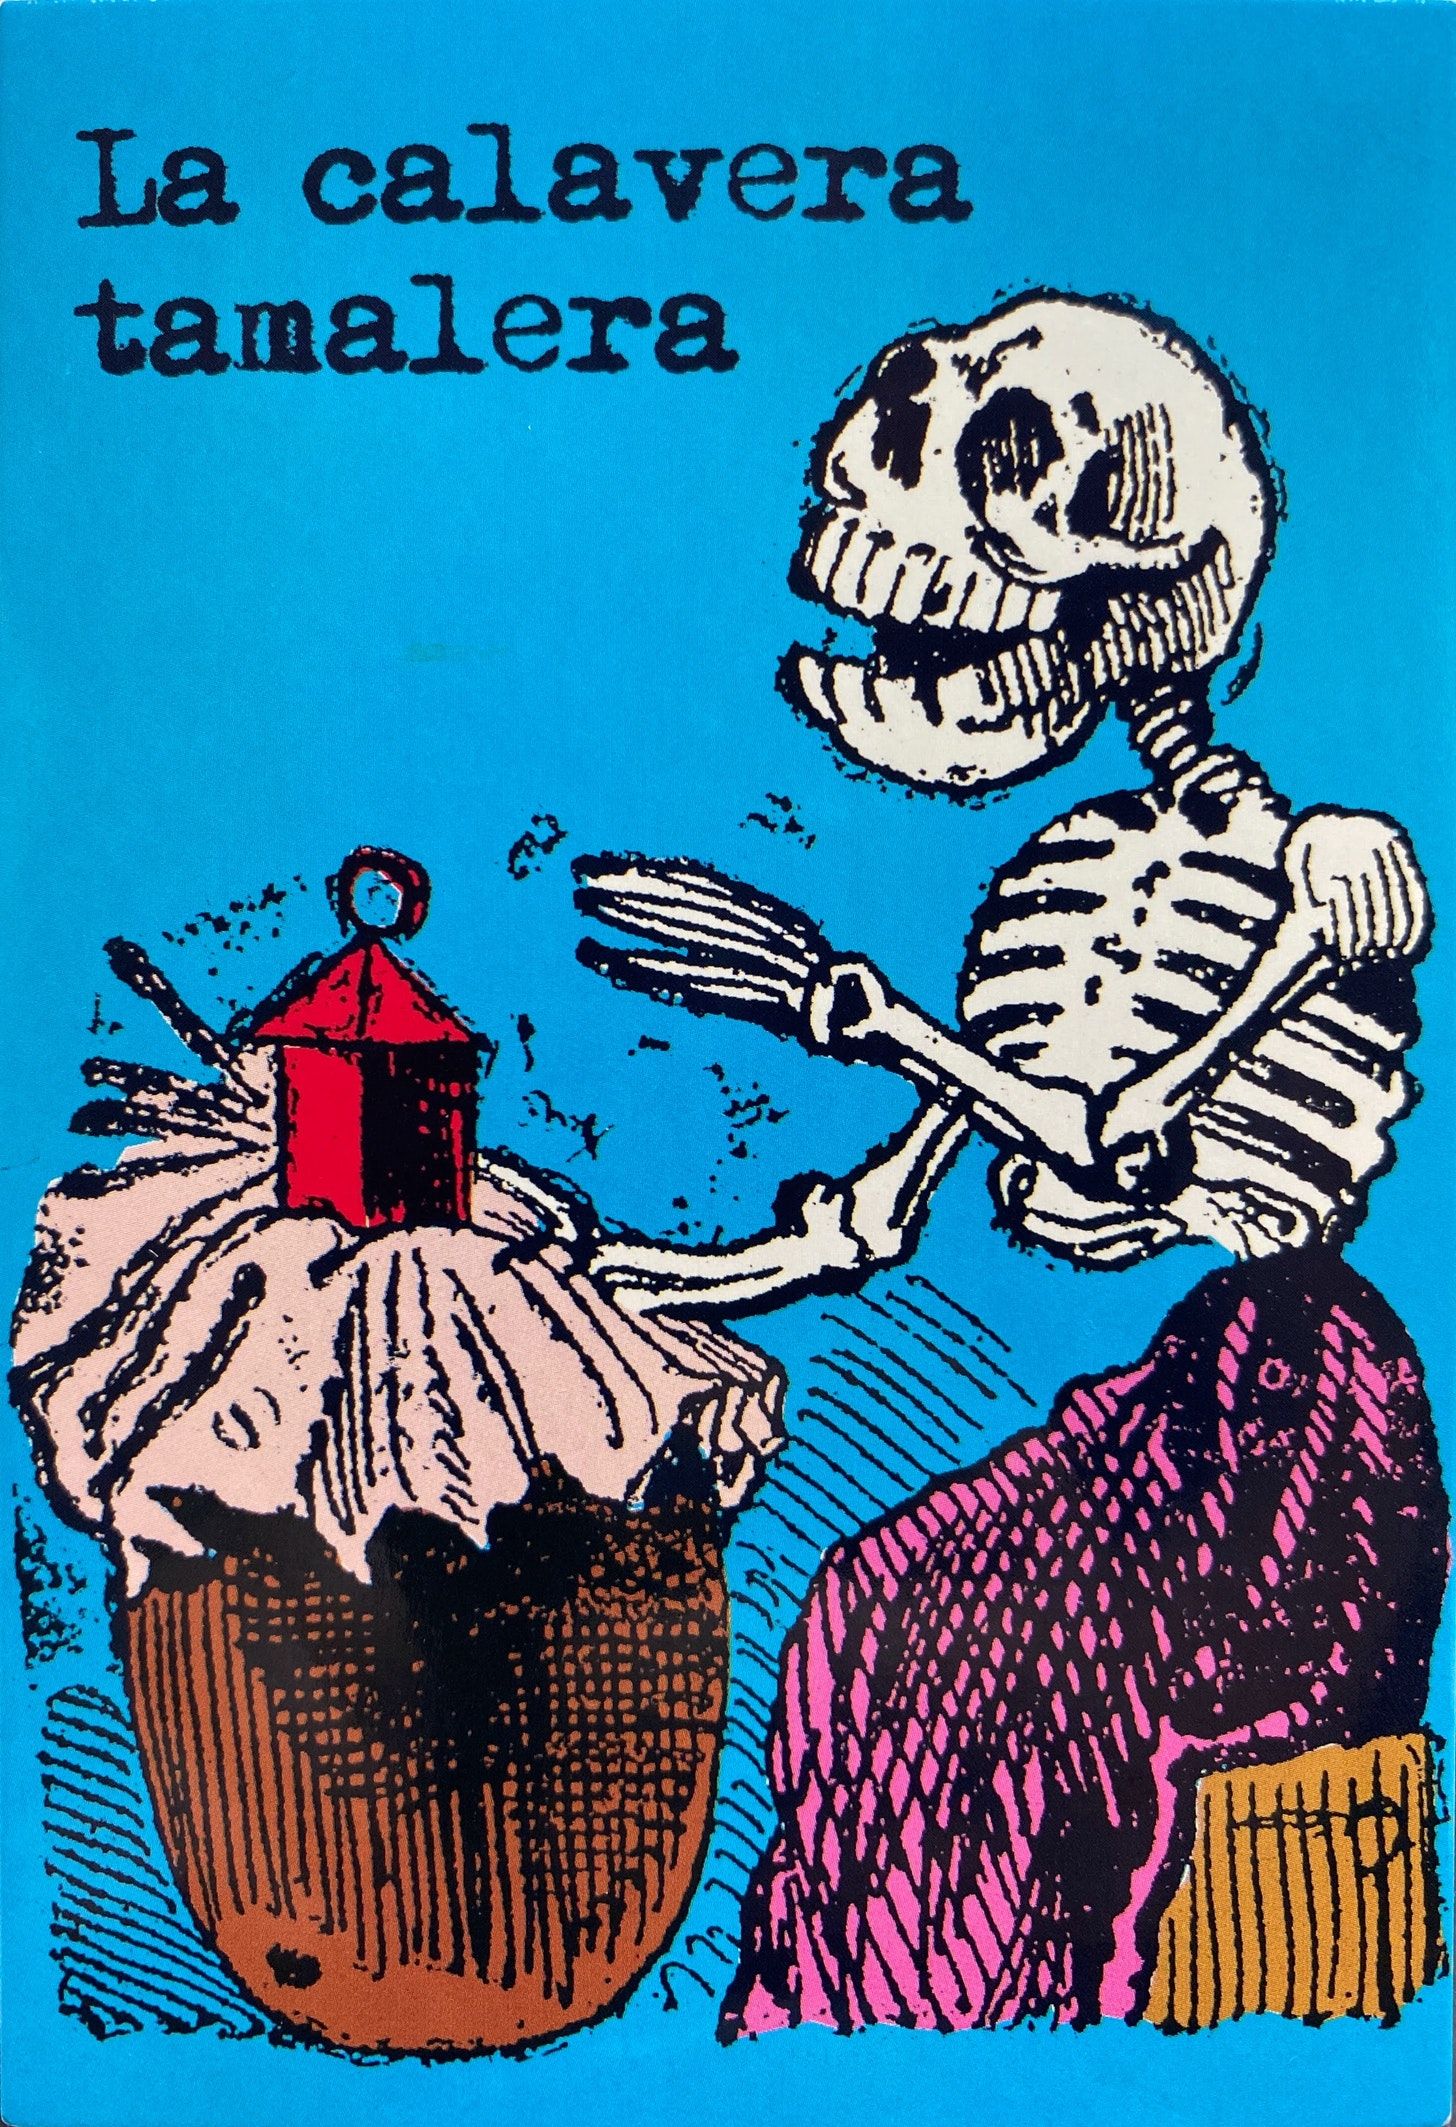 A sitting skeleton, wearing a skirt, while tending a container with tamales in front of them.